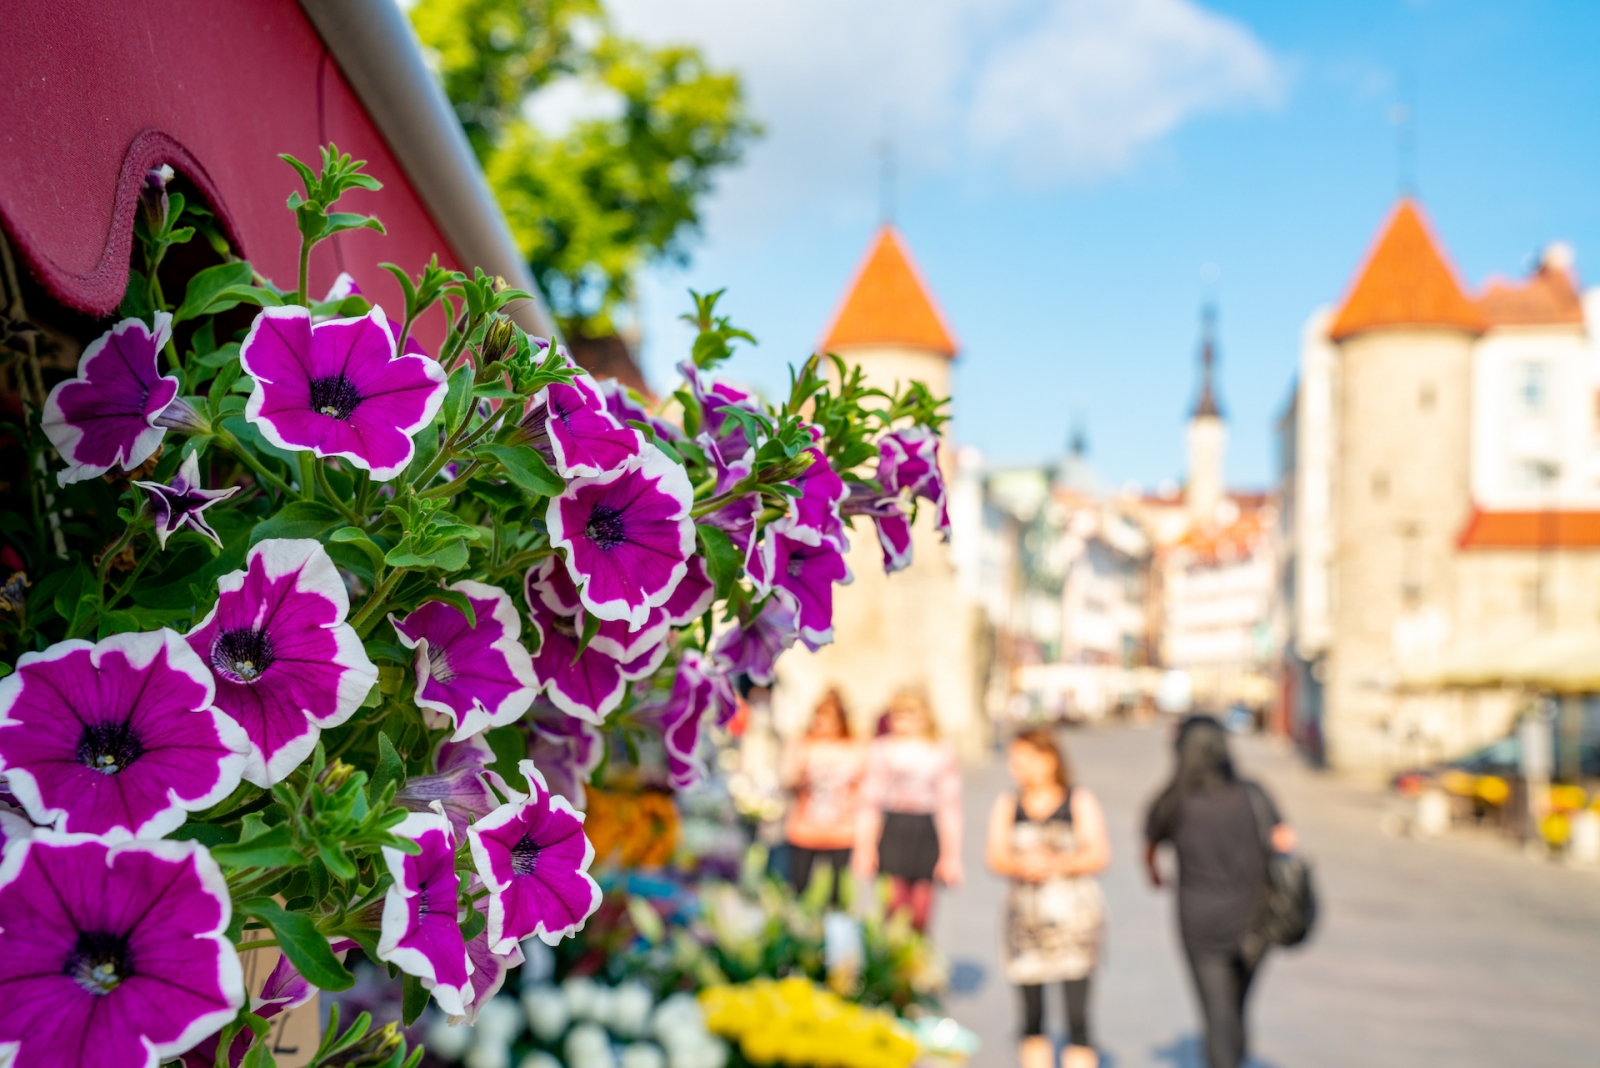 Beautiful flowers in the middle of Tallinns old town.